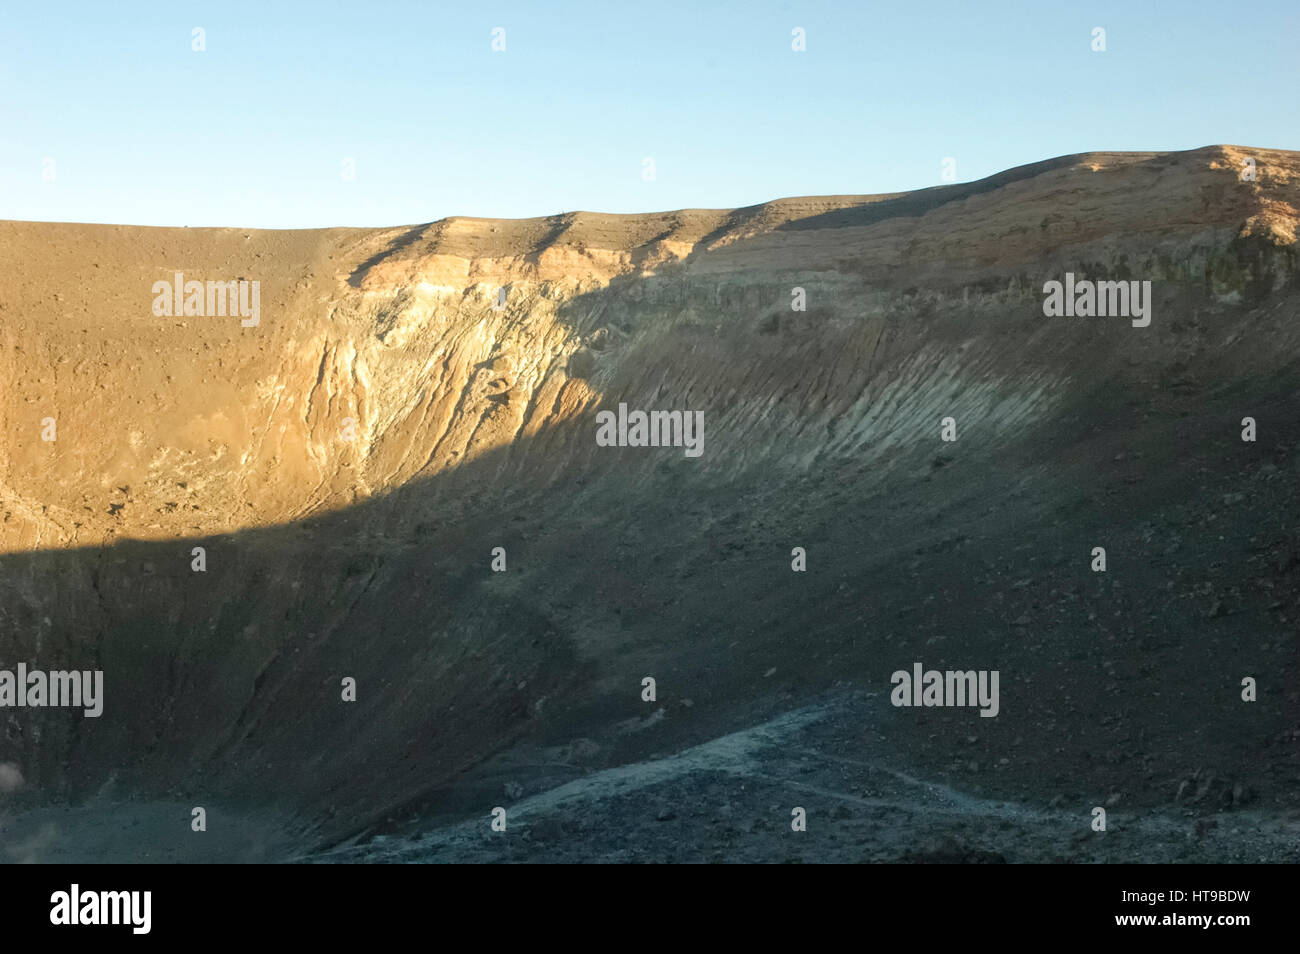 View of the large crater of Volcano Stock Photo